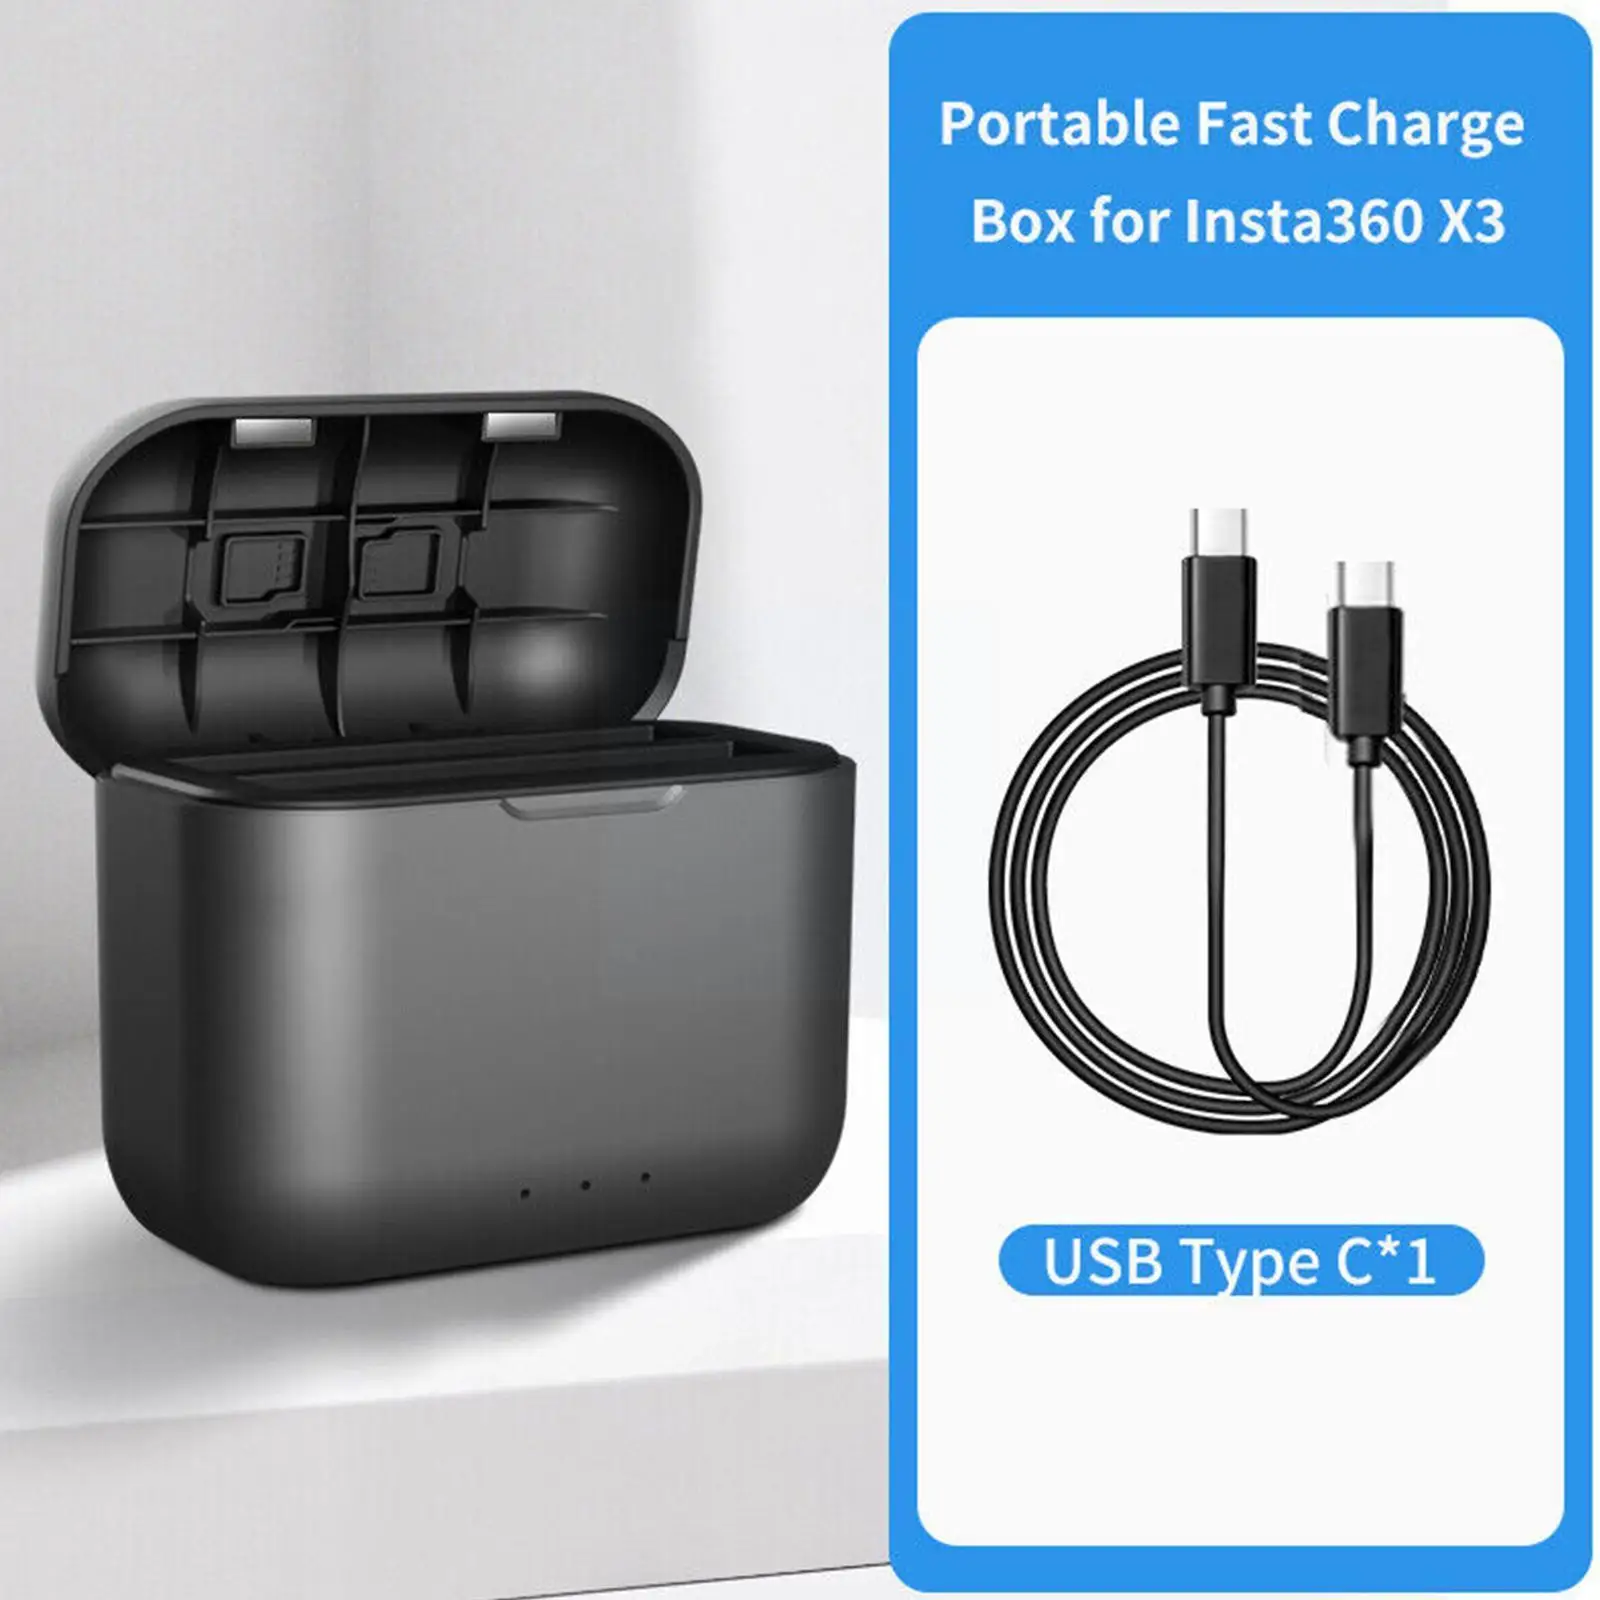 

USB Type-C Battery Fast Charging Box For Insta360 X3 Portable Fast Charge Accessories For Insta 360 X3 Output 4.35V/2.5A Z5R6